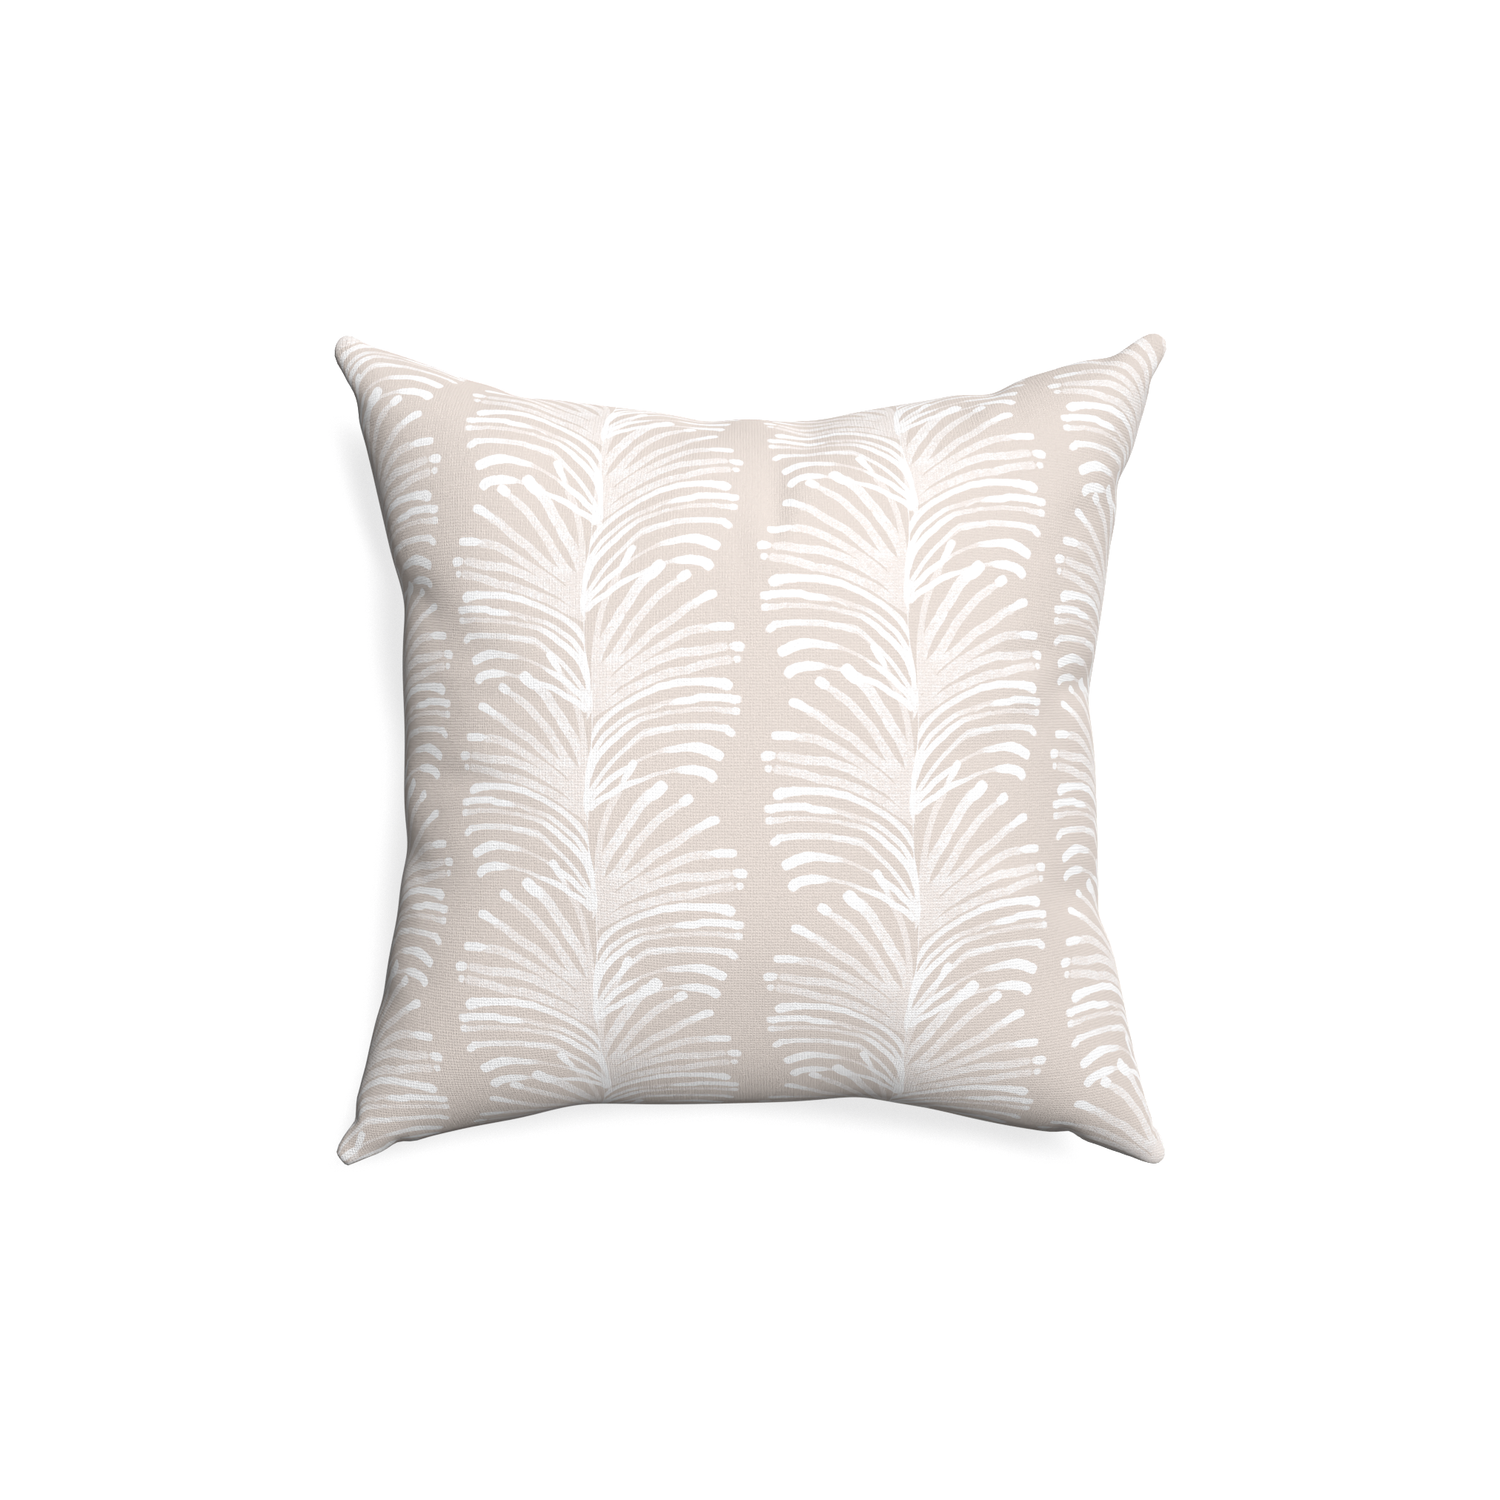 18-square emma sand custom pillow with none on white background